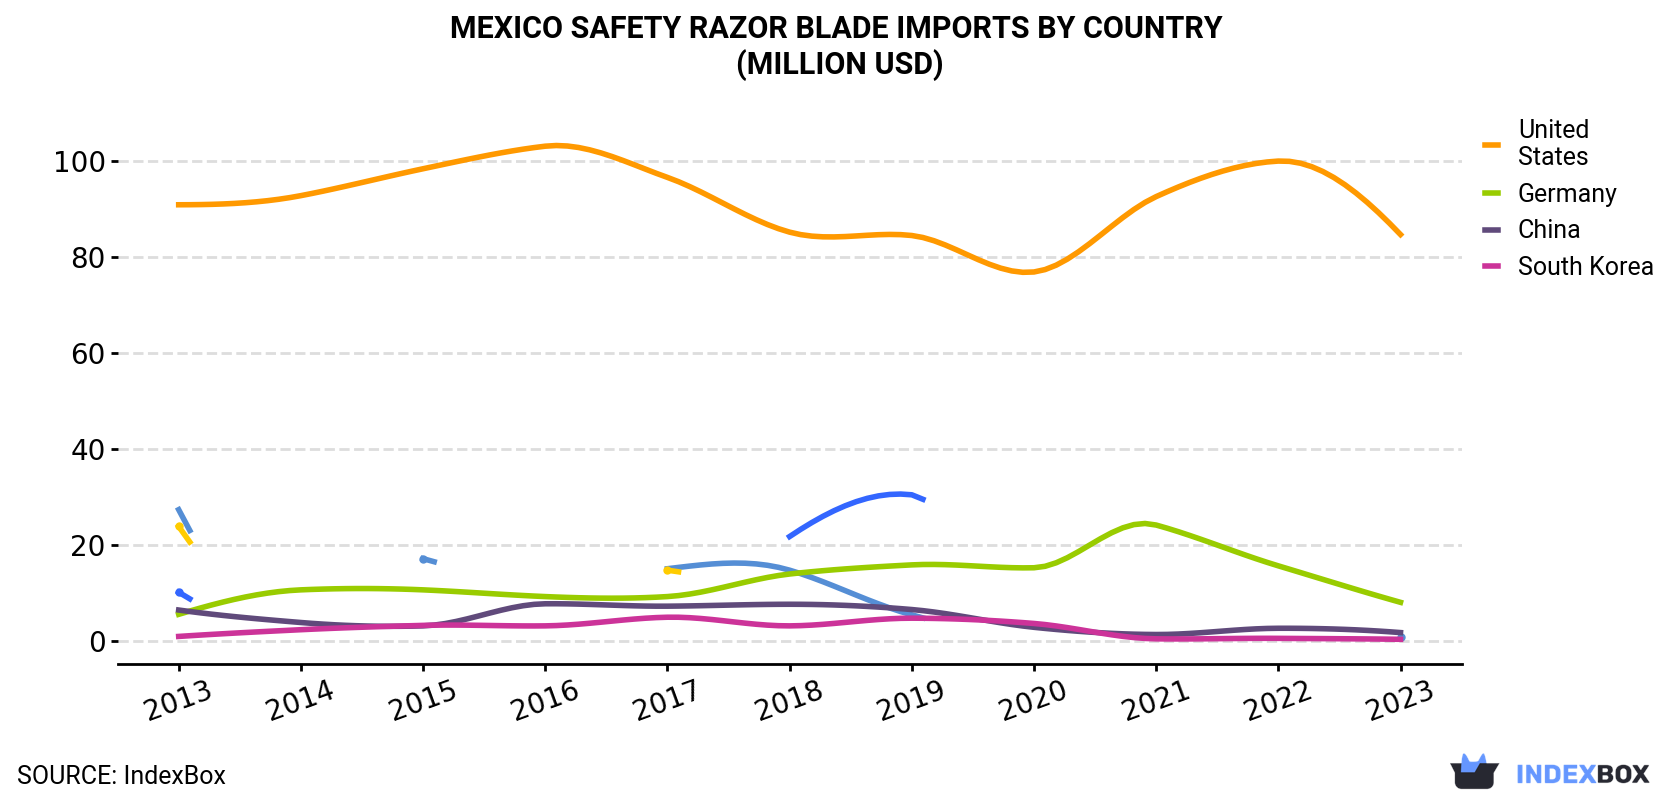 Mexico Safety Razor Blade Imports By Country (Million USD)